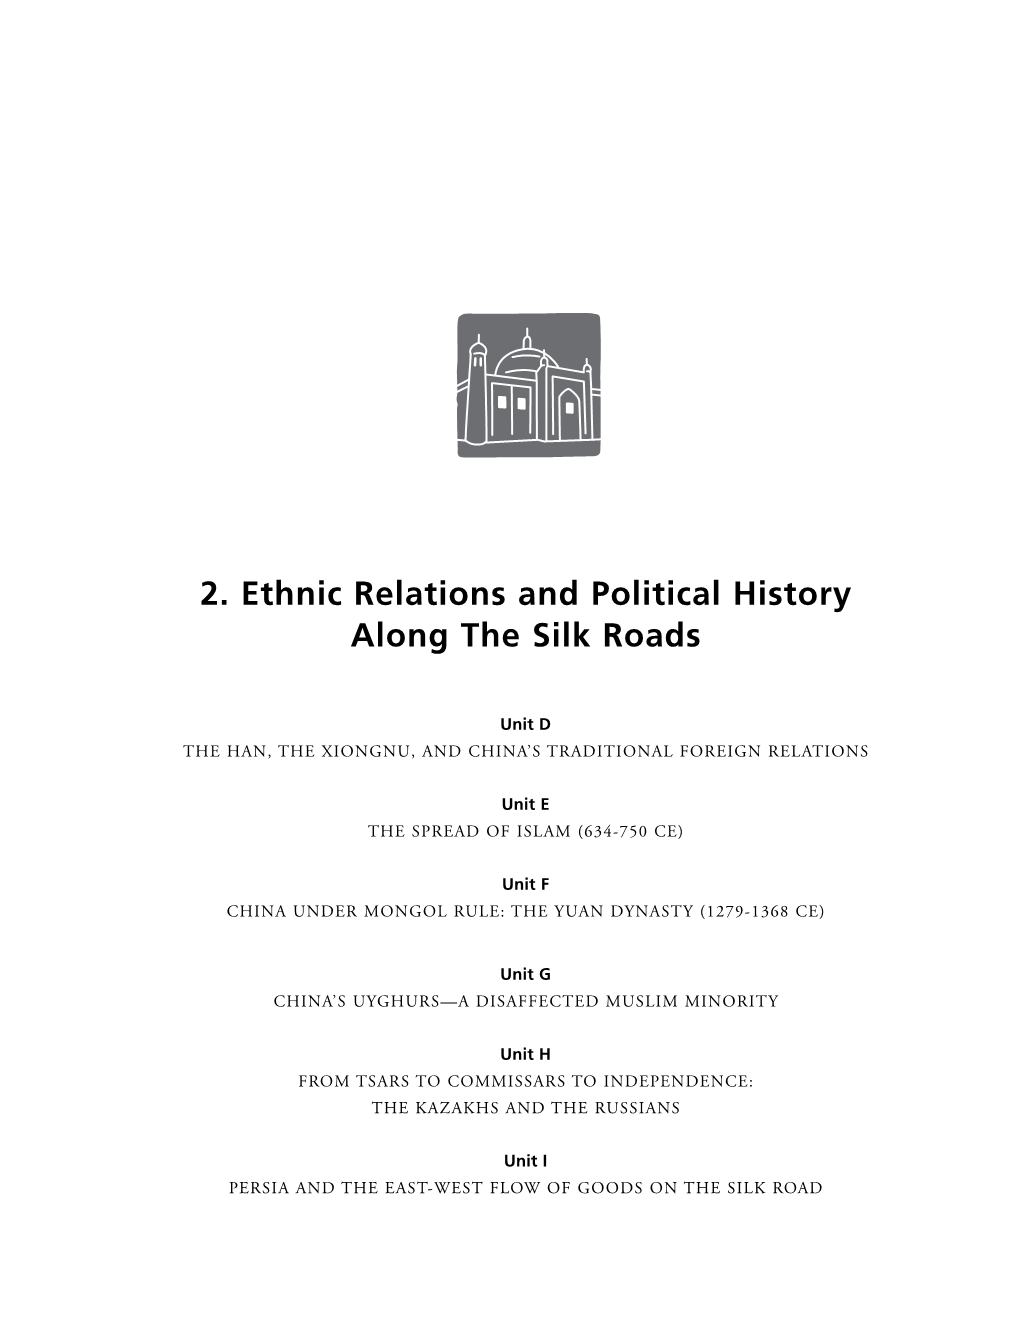 2. Ethnic Relations and Political History Along the Silk Roads